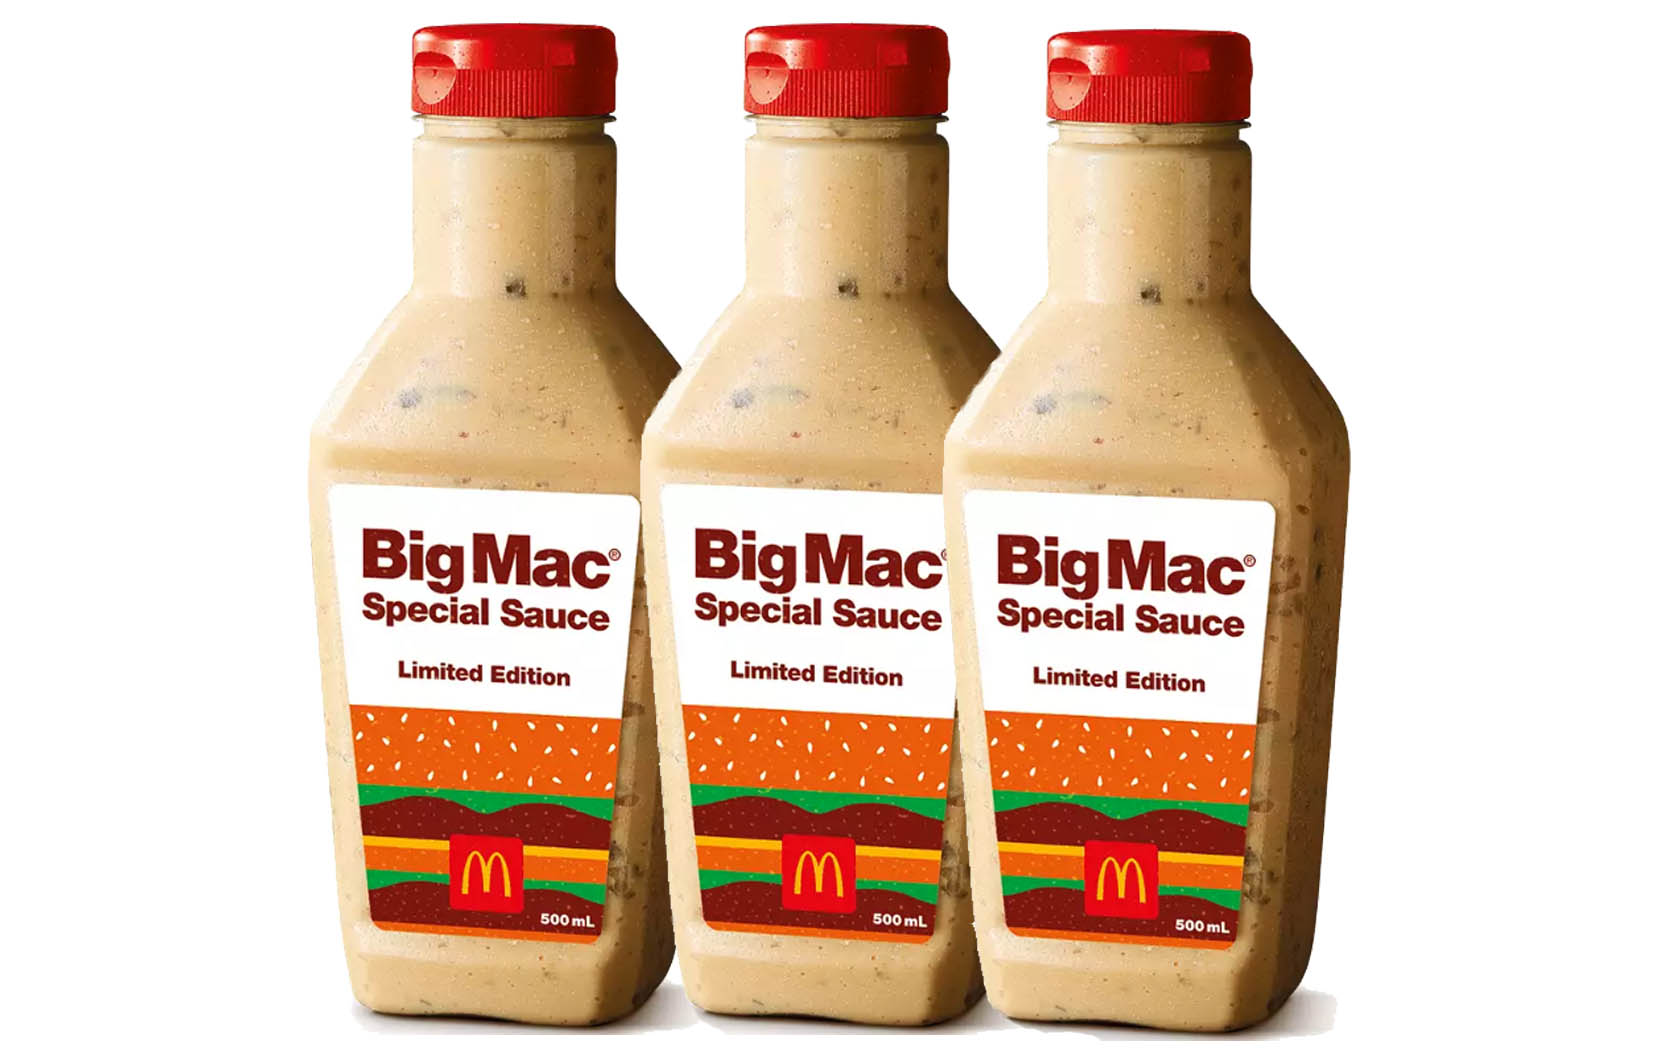 Big Mac Sauce How To Buy A Limited Edition Bottle In Australia,Turtle Shell Shedding